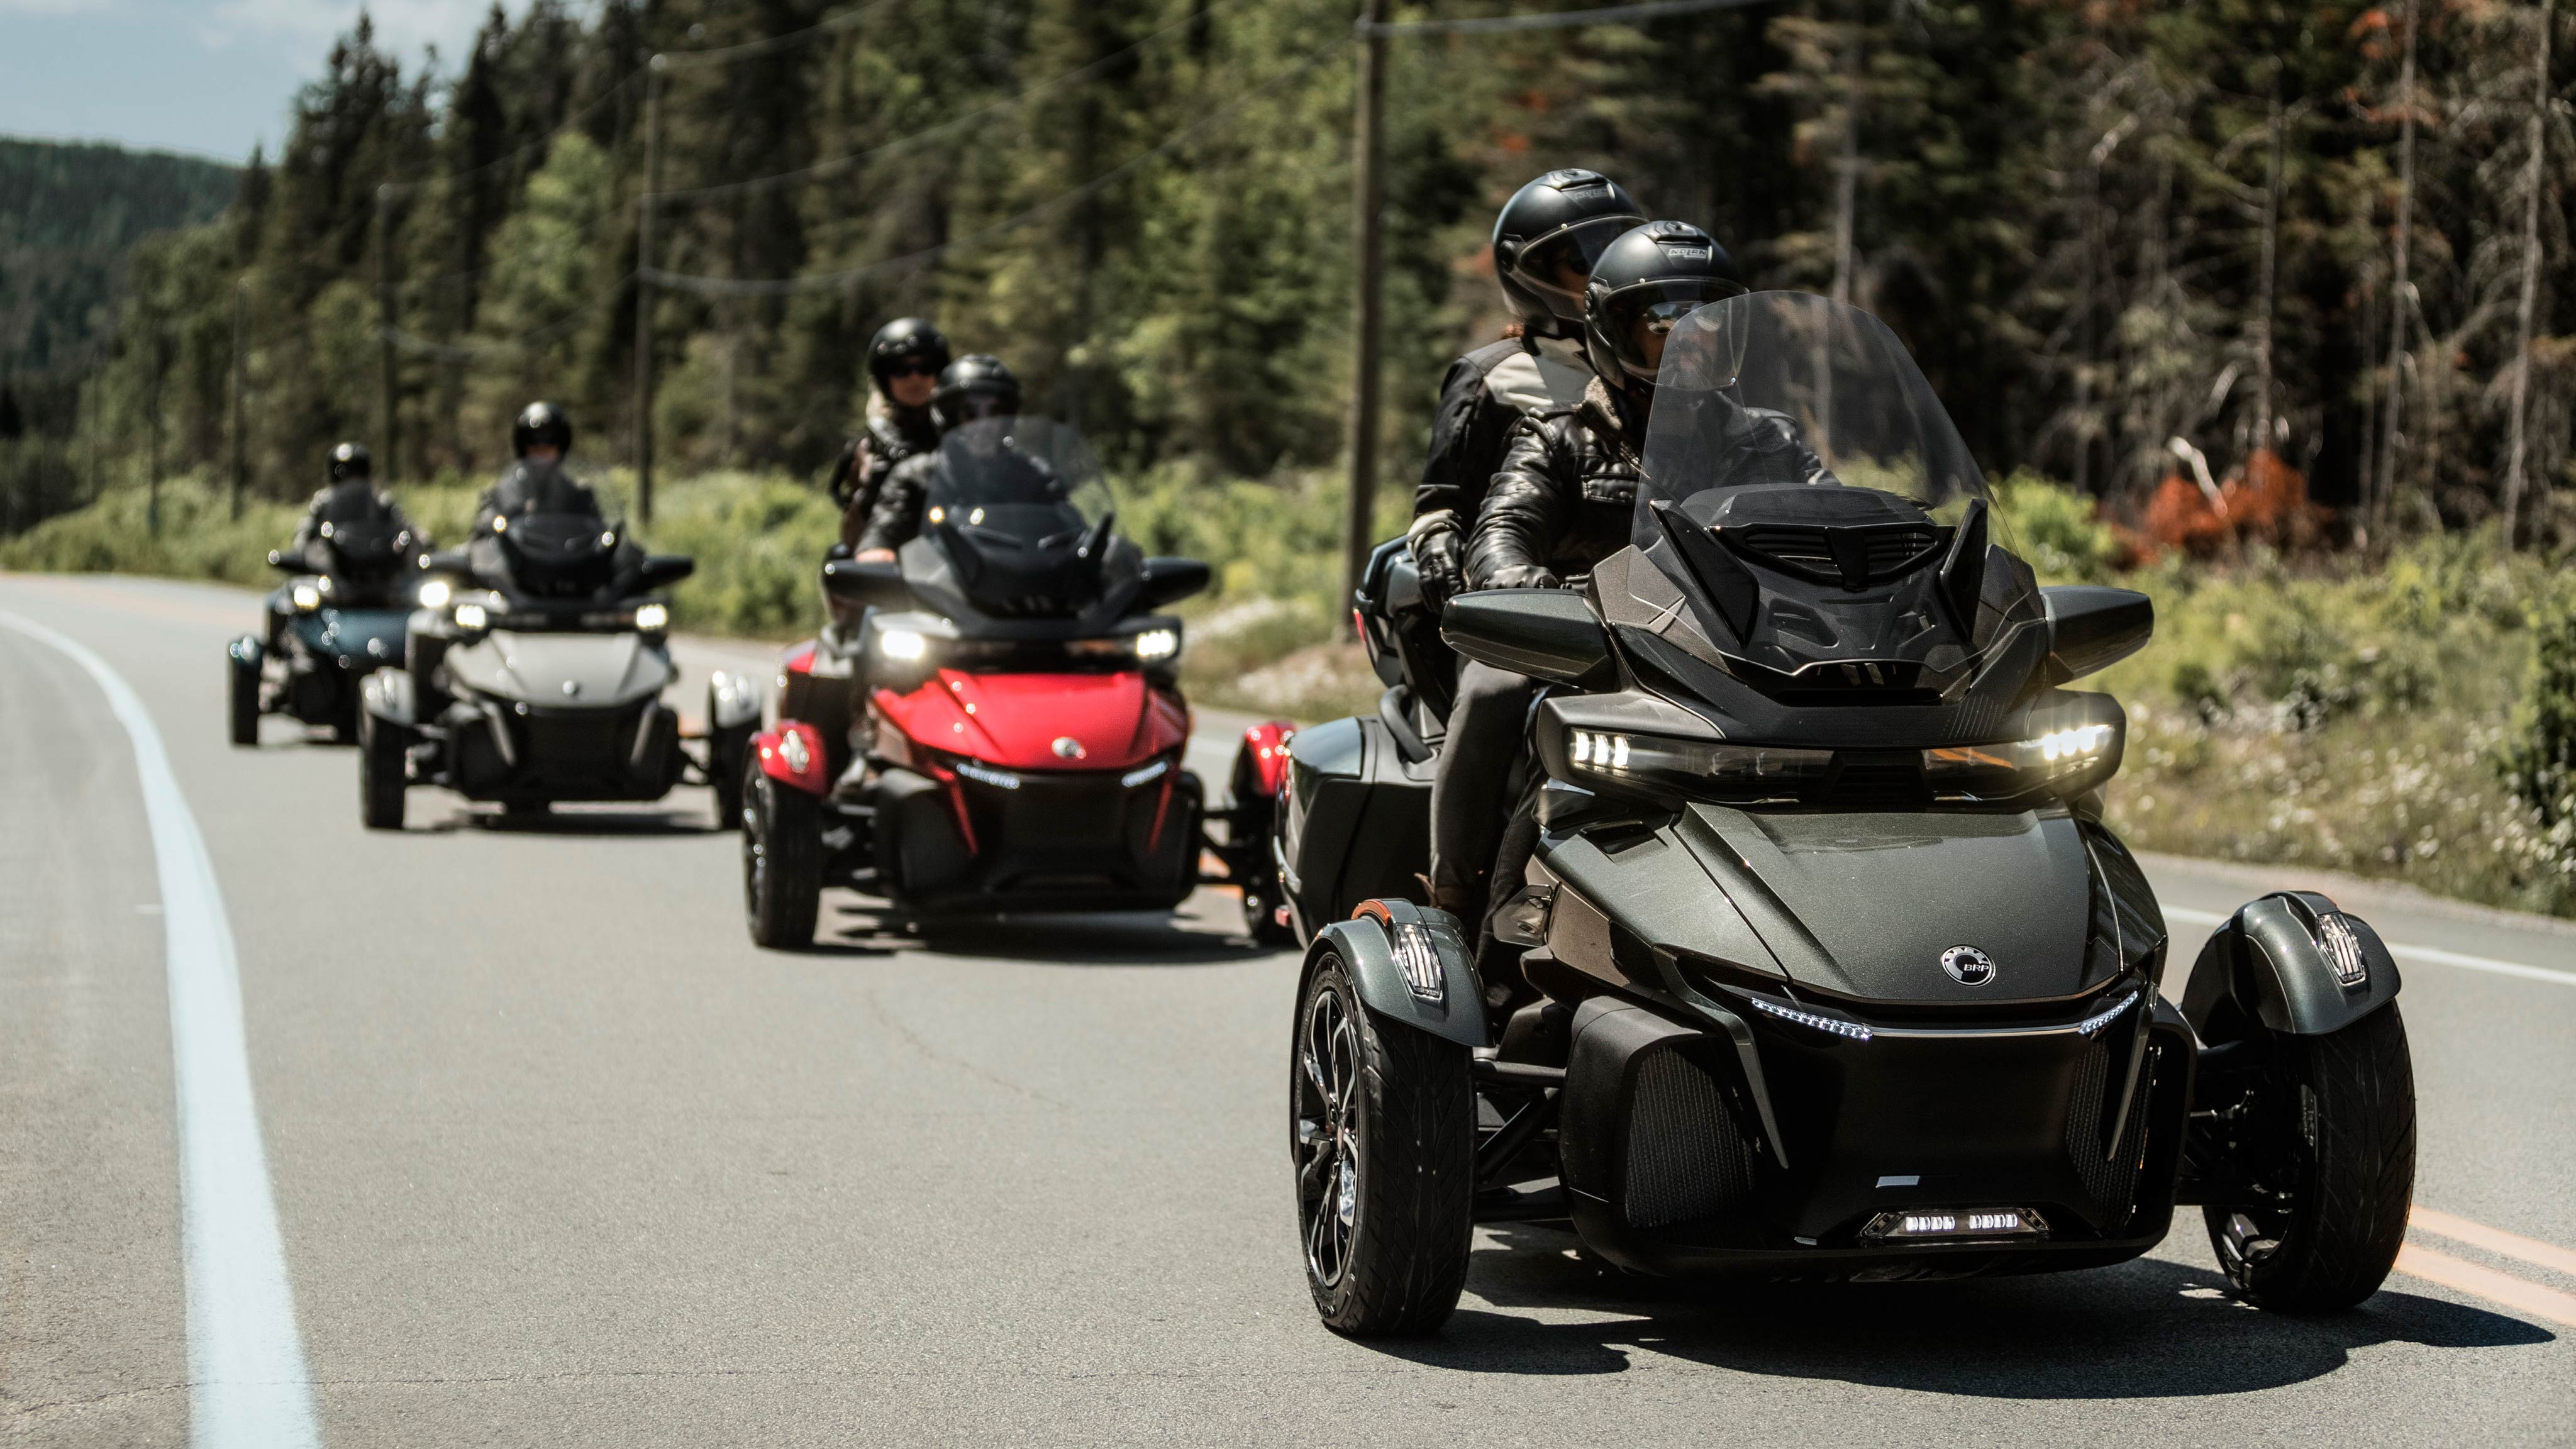 People on Can-Am Spyders on the road